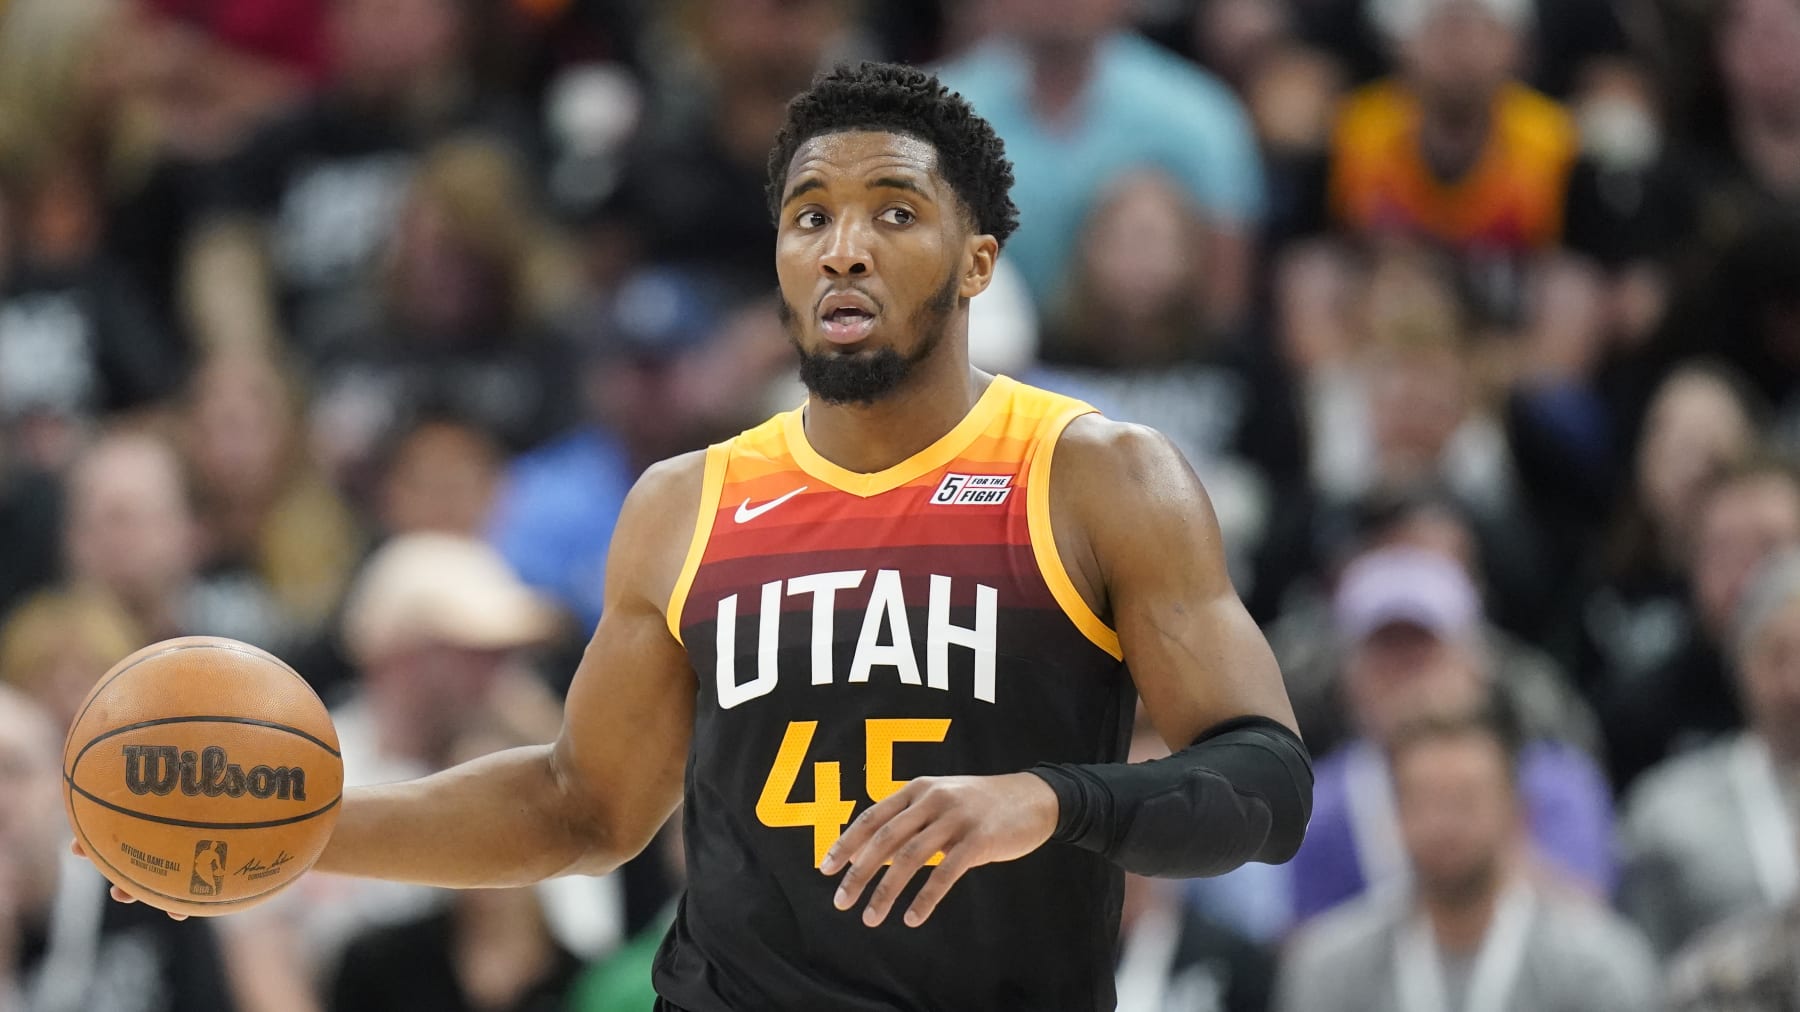 New mock trade has Sixers acquiring star Donovan Mitchell from Jazz